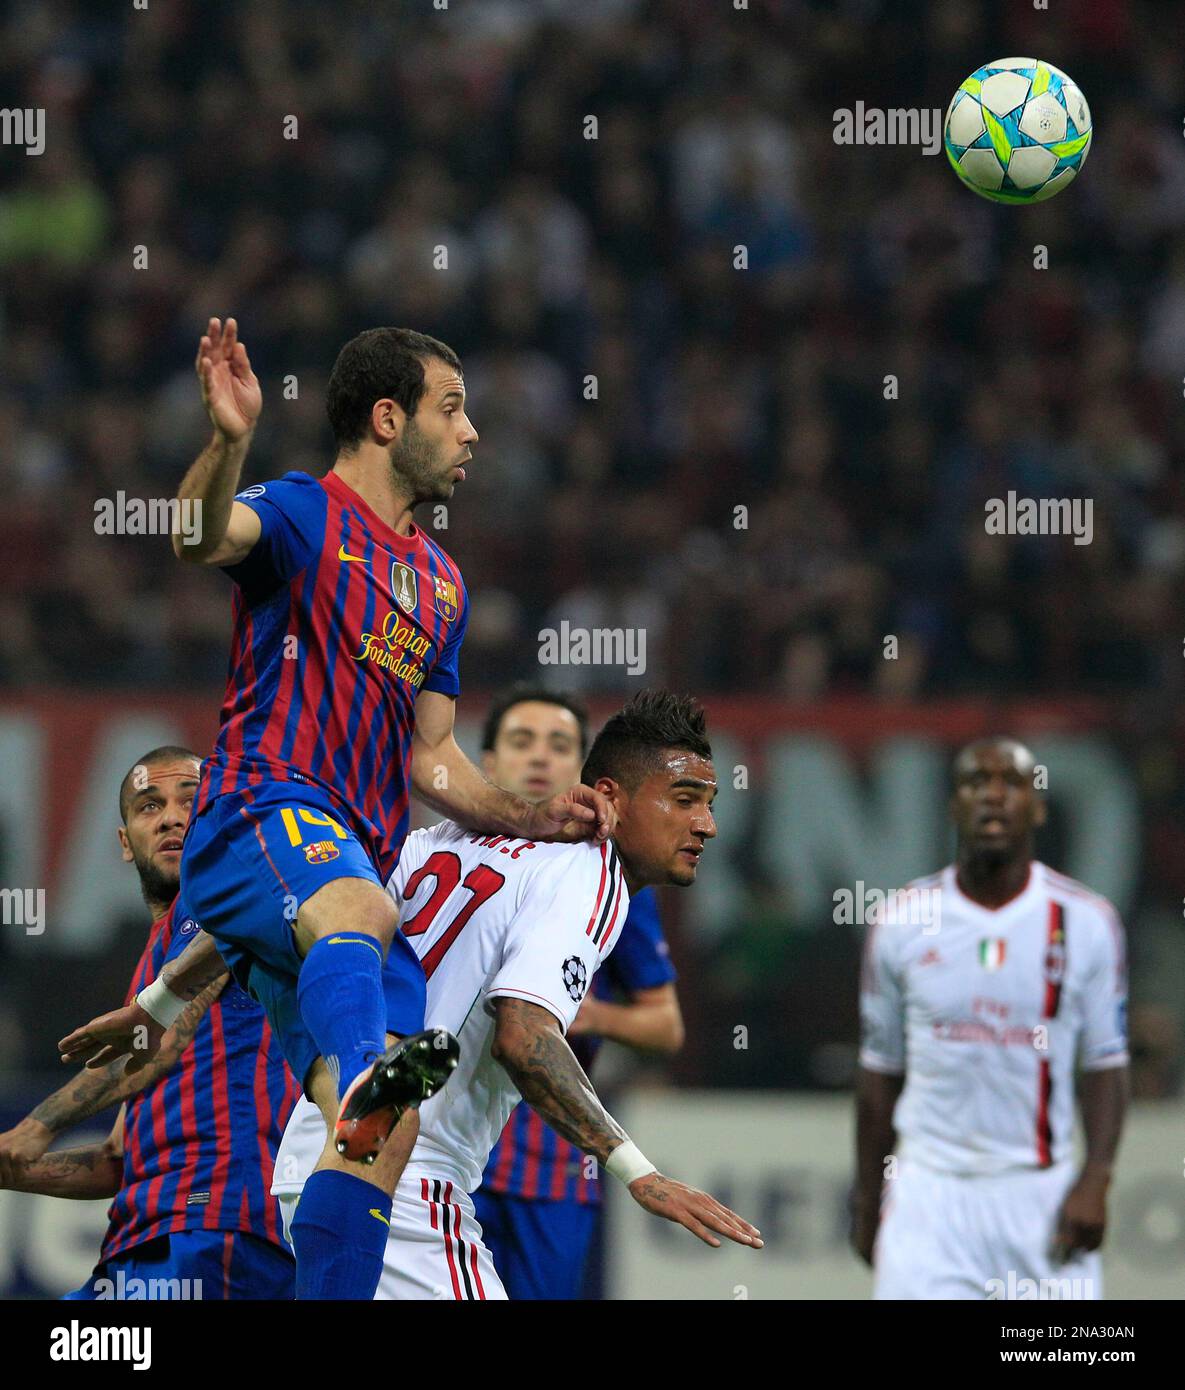 Barcelona midfielder Sergio Busquets heads the ball over AC Milan  midfielder Kevin Prince Boateng, of Ghana, during a Champions League first  leg quarterfinals soccer match, between AC Milan and Barcelona, at the